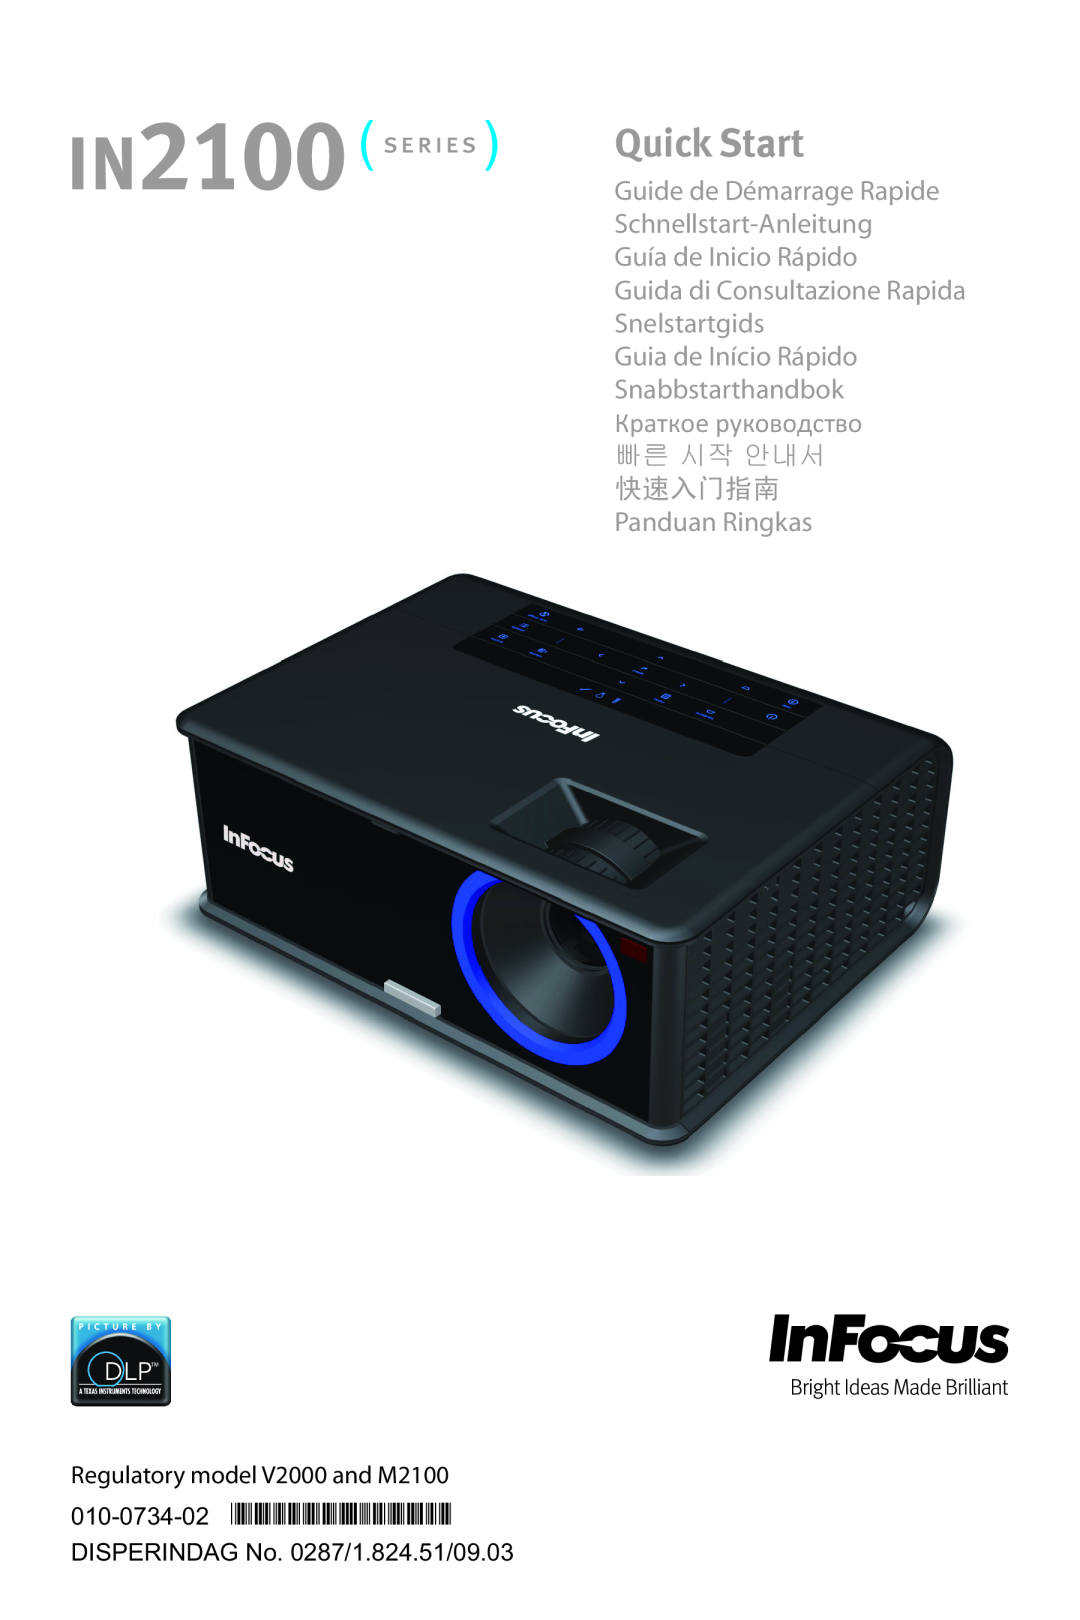 InFocus in2100 manual IN2100, Reliable Workhorse 